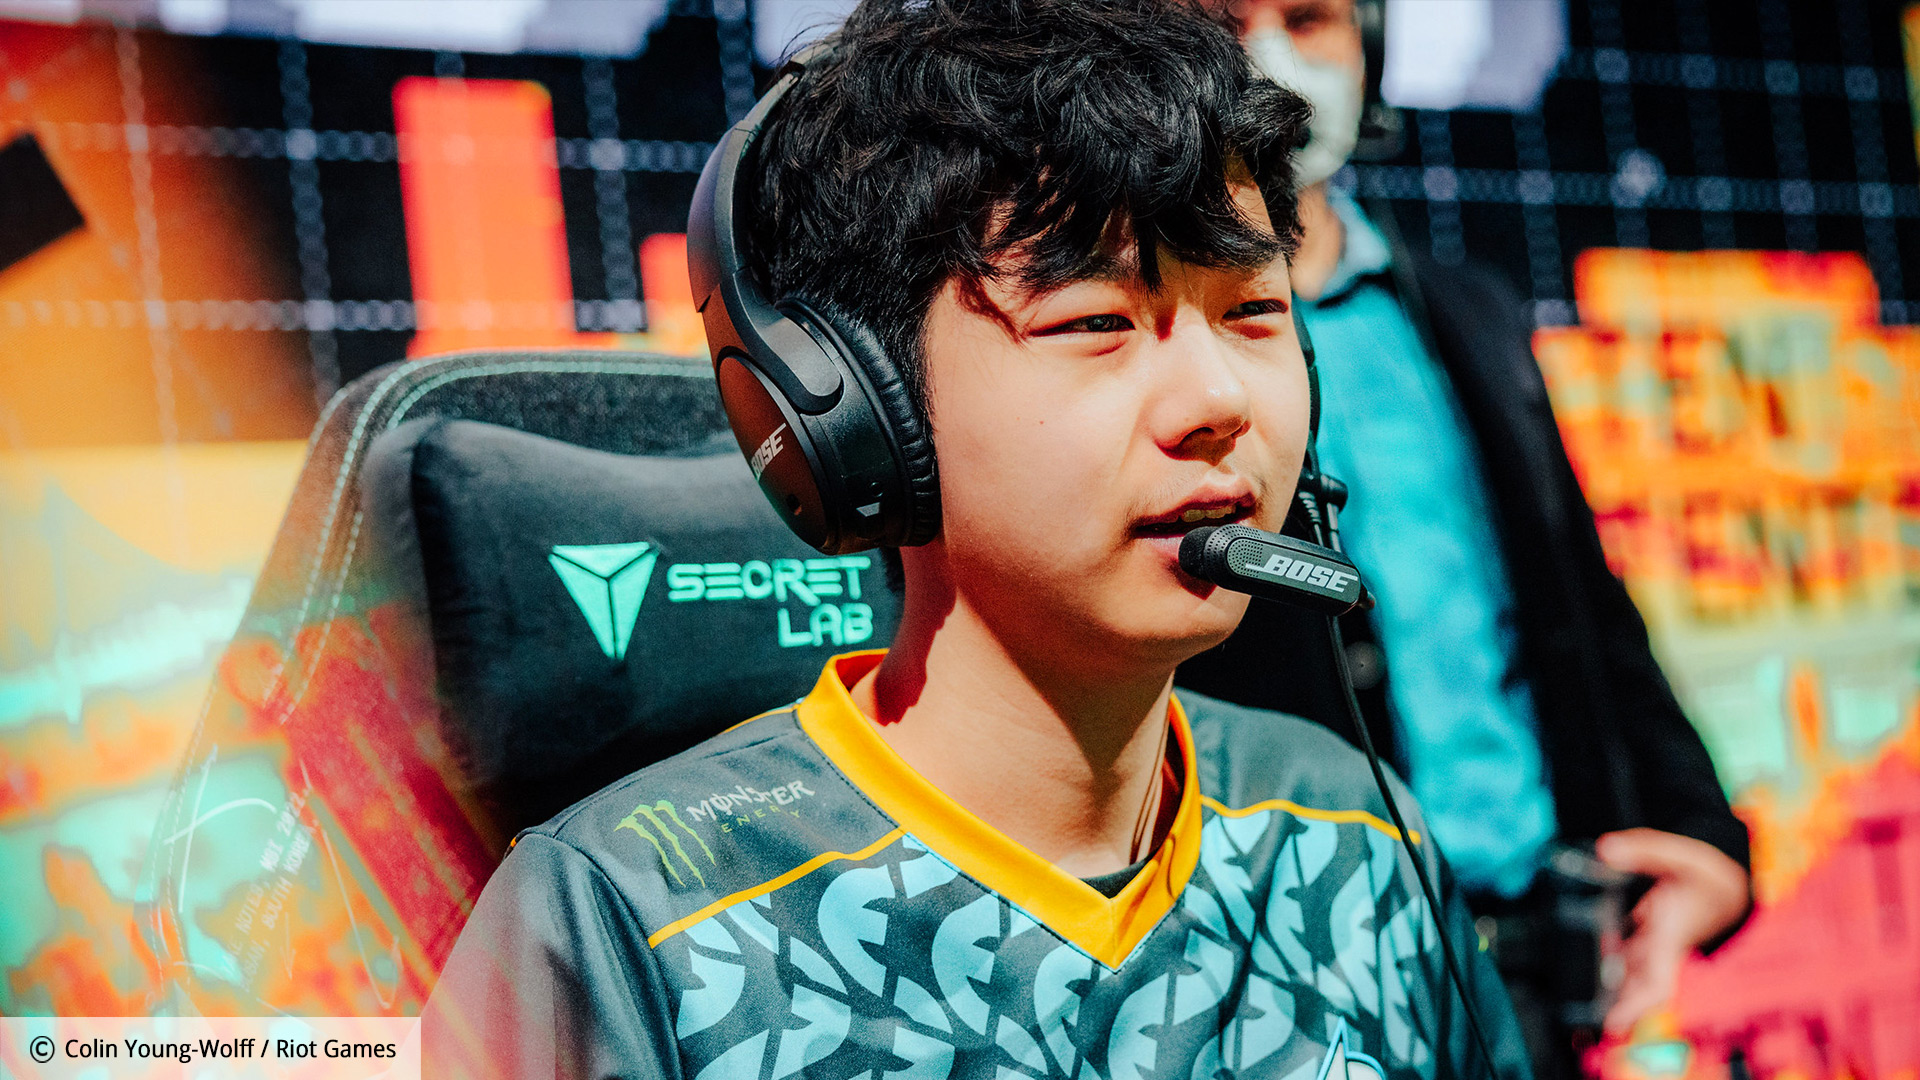 League of Legends Trash Talk: MSI 2019 - Player of Team G2 Esports claims  to crush Faker, and the boss laughs with tears because all practice match  lose - Not A Gamer